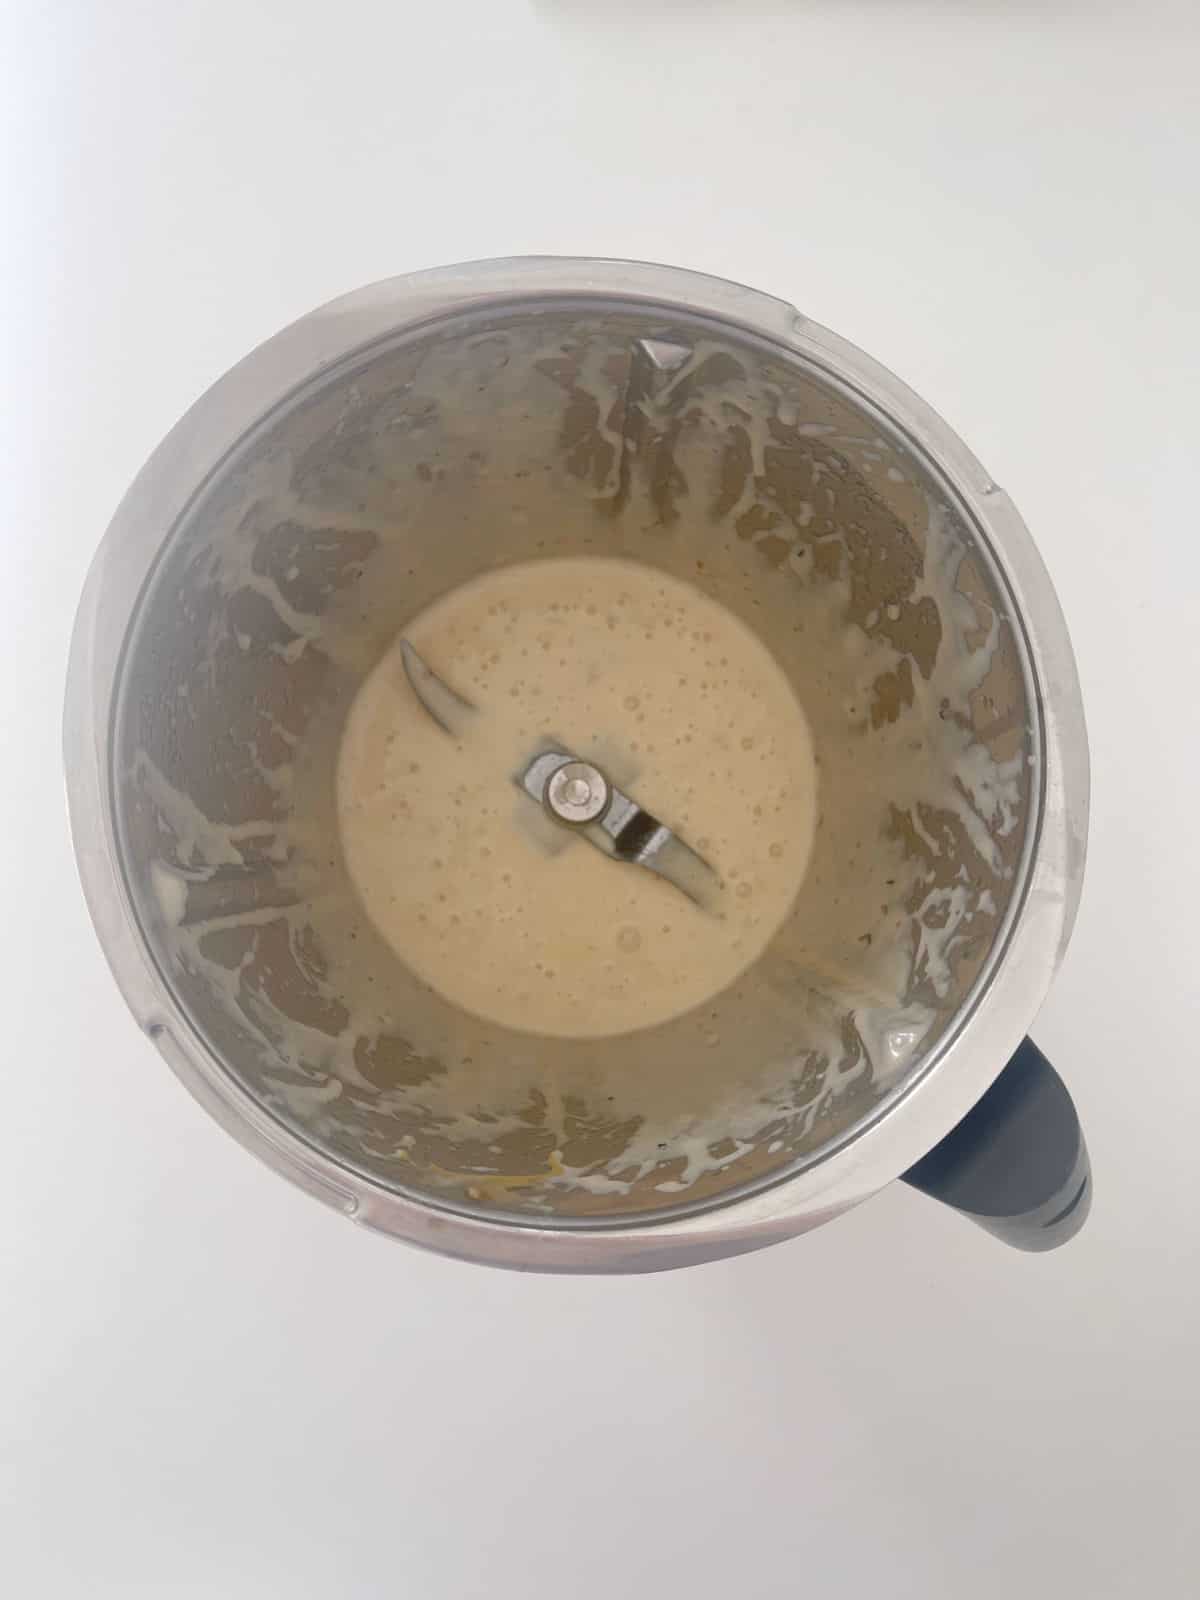 Coconut oil, eggs, banana and vanilla extract combined in a Thermomix bowl.